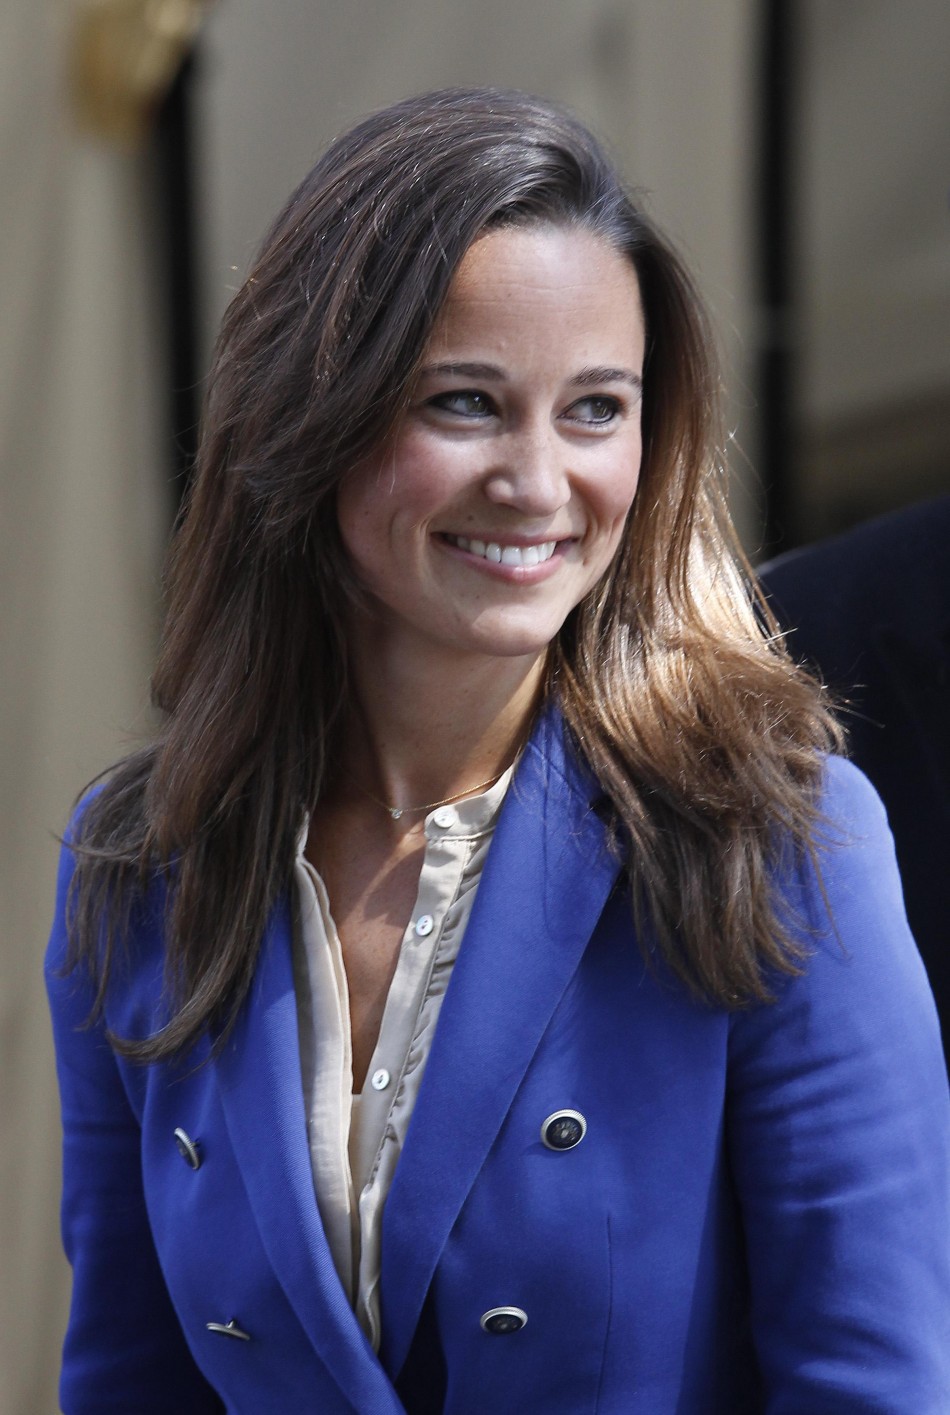 Pippa Middleton, sister of Duchess Kate Middleton, could be arrested for a gun incident that took place on Saturday in Paris.